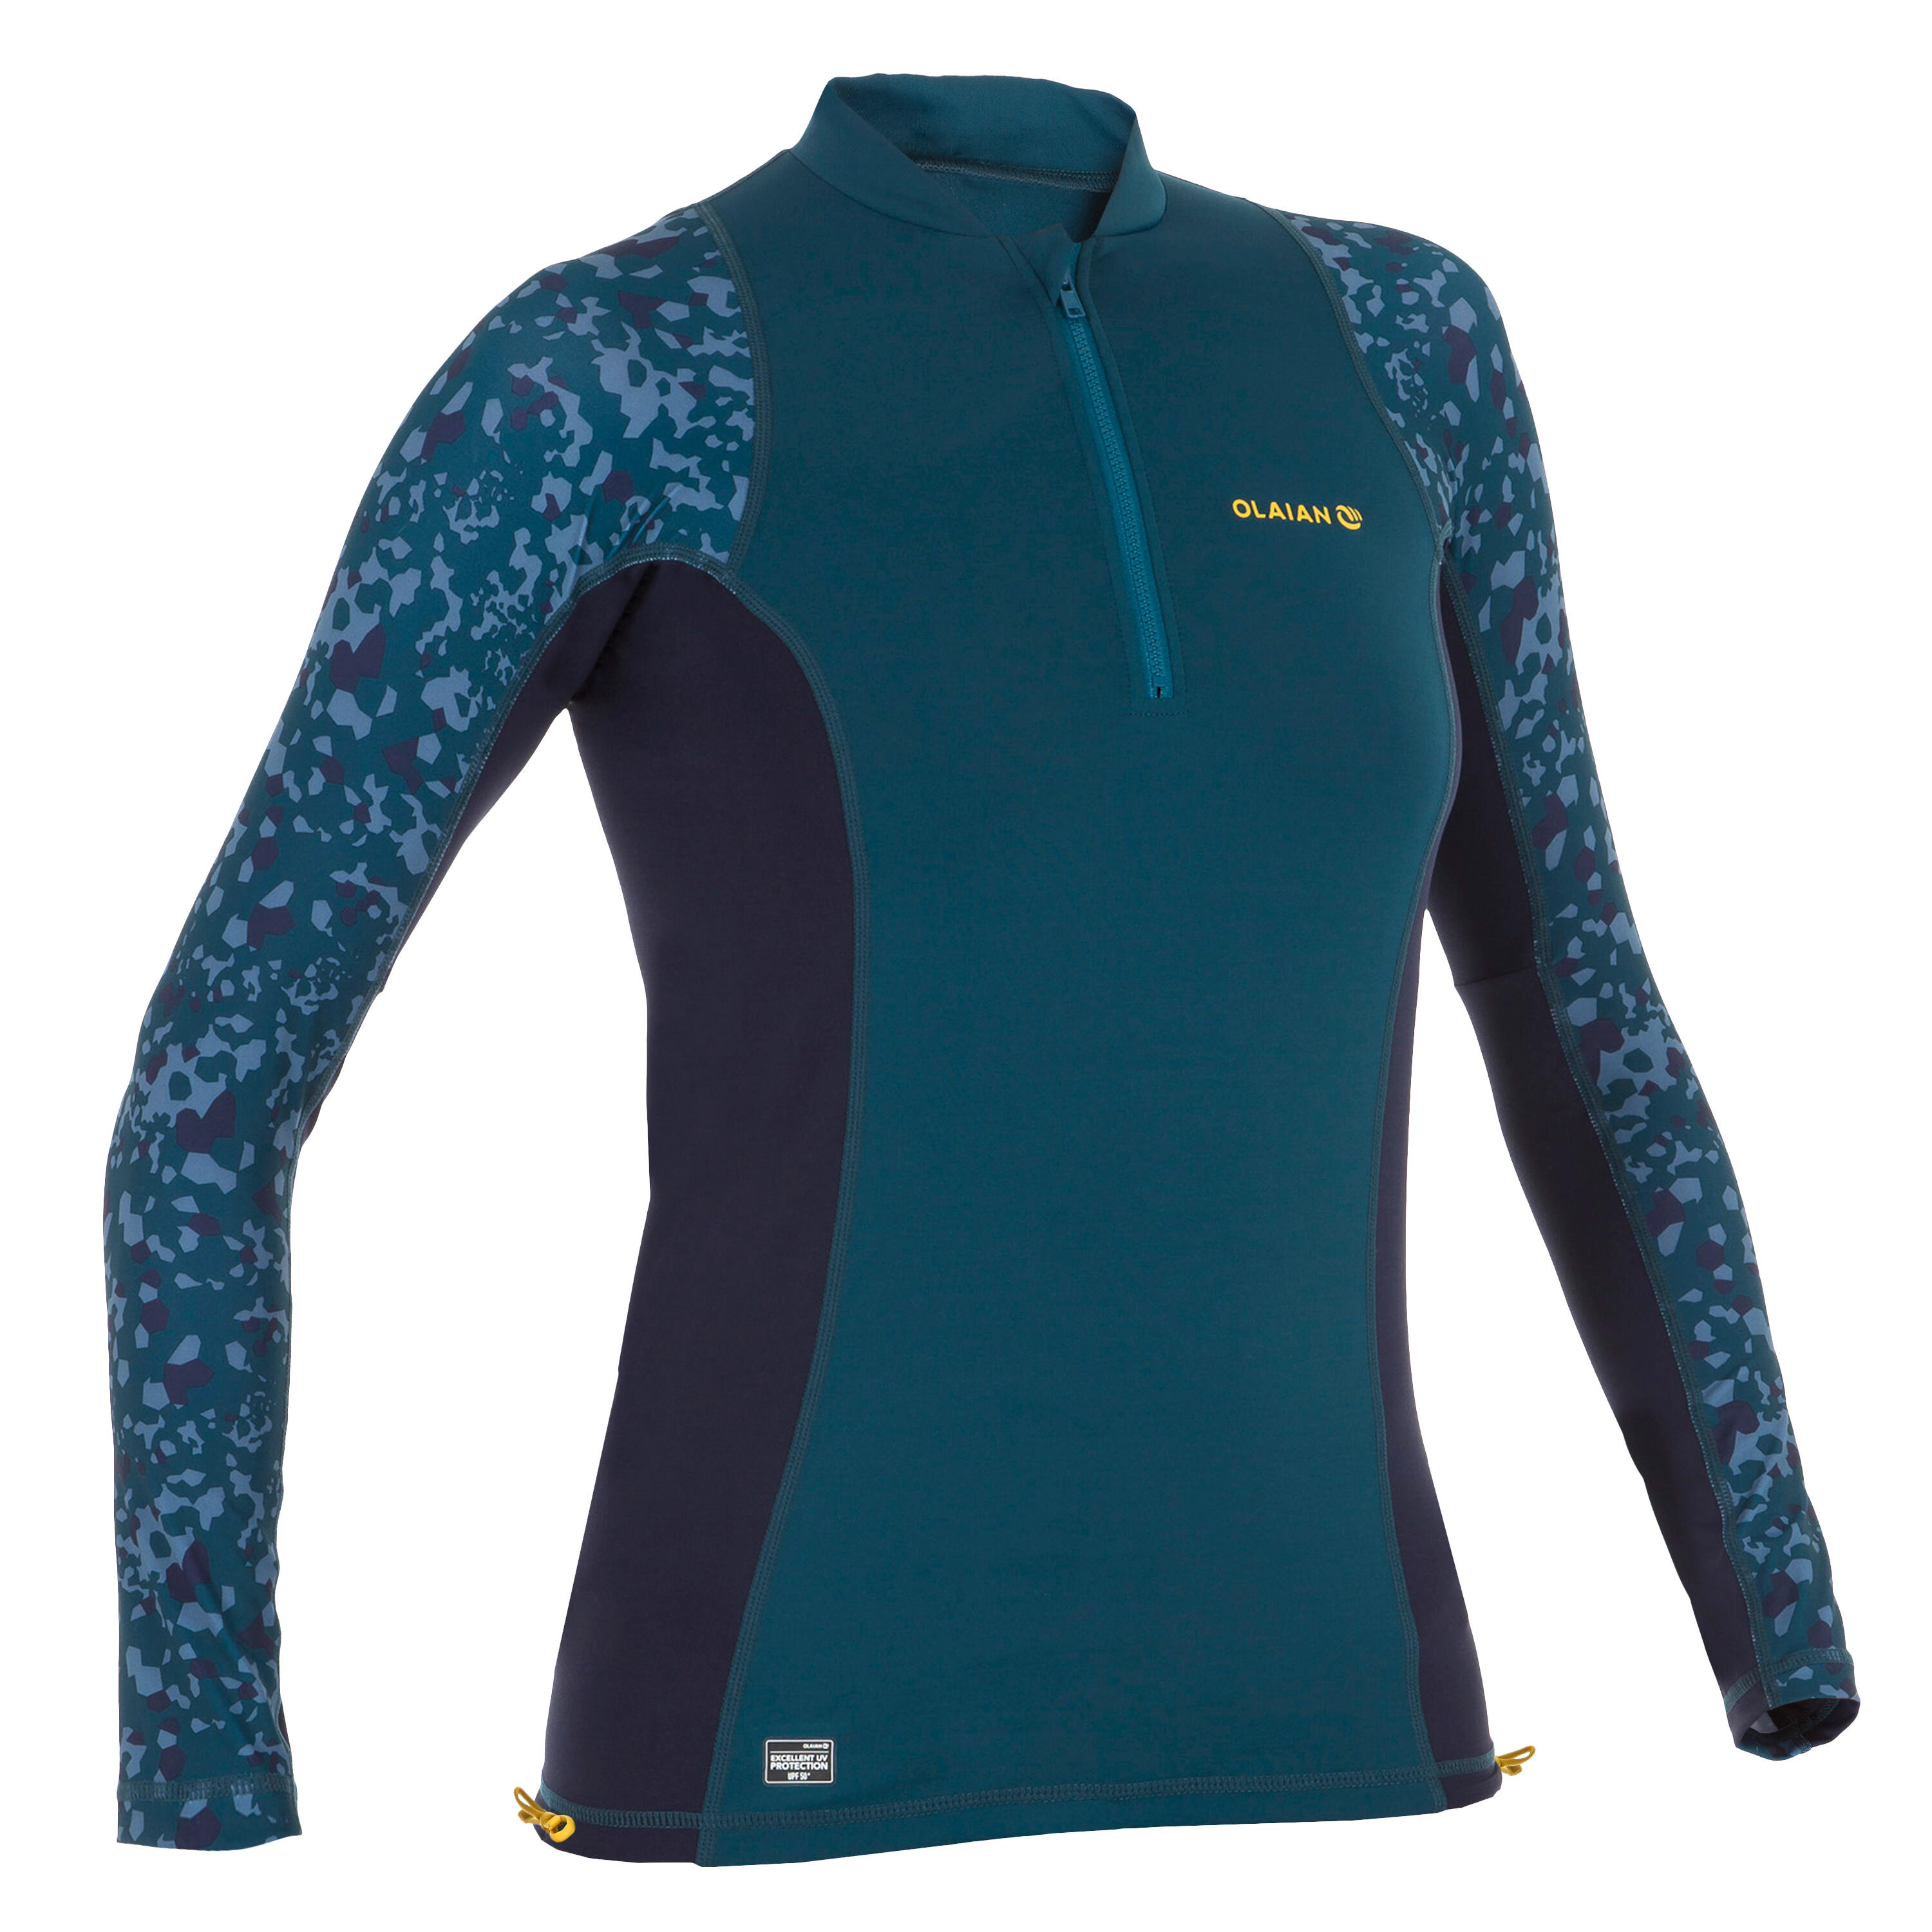 OLAIAN 500 women's long sleeve UV protection surfing top - Blue print